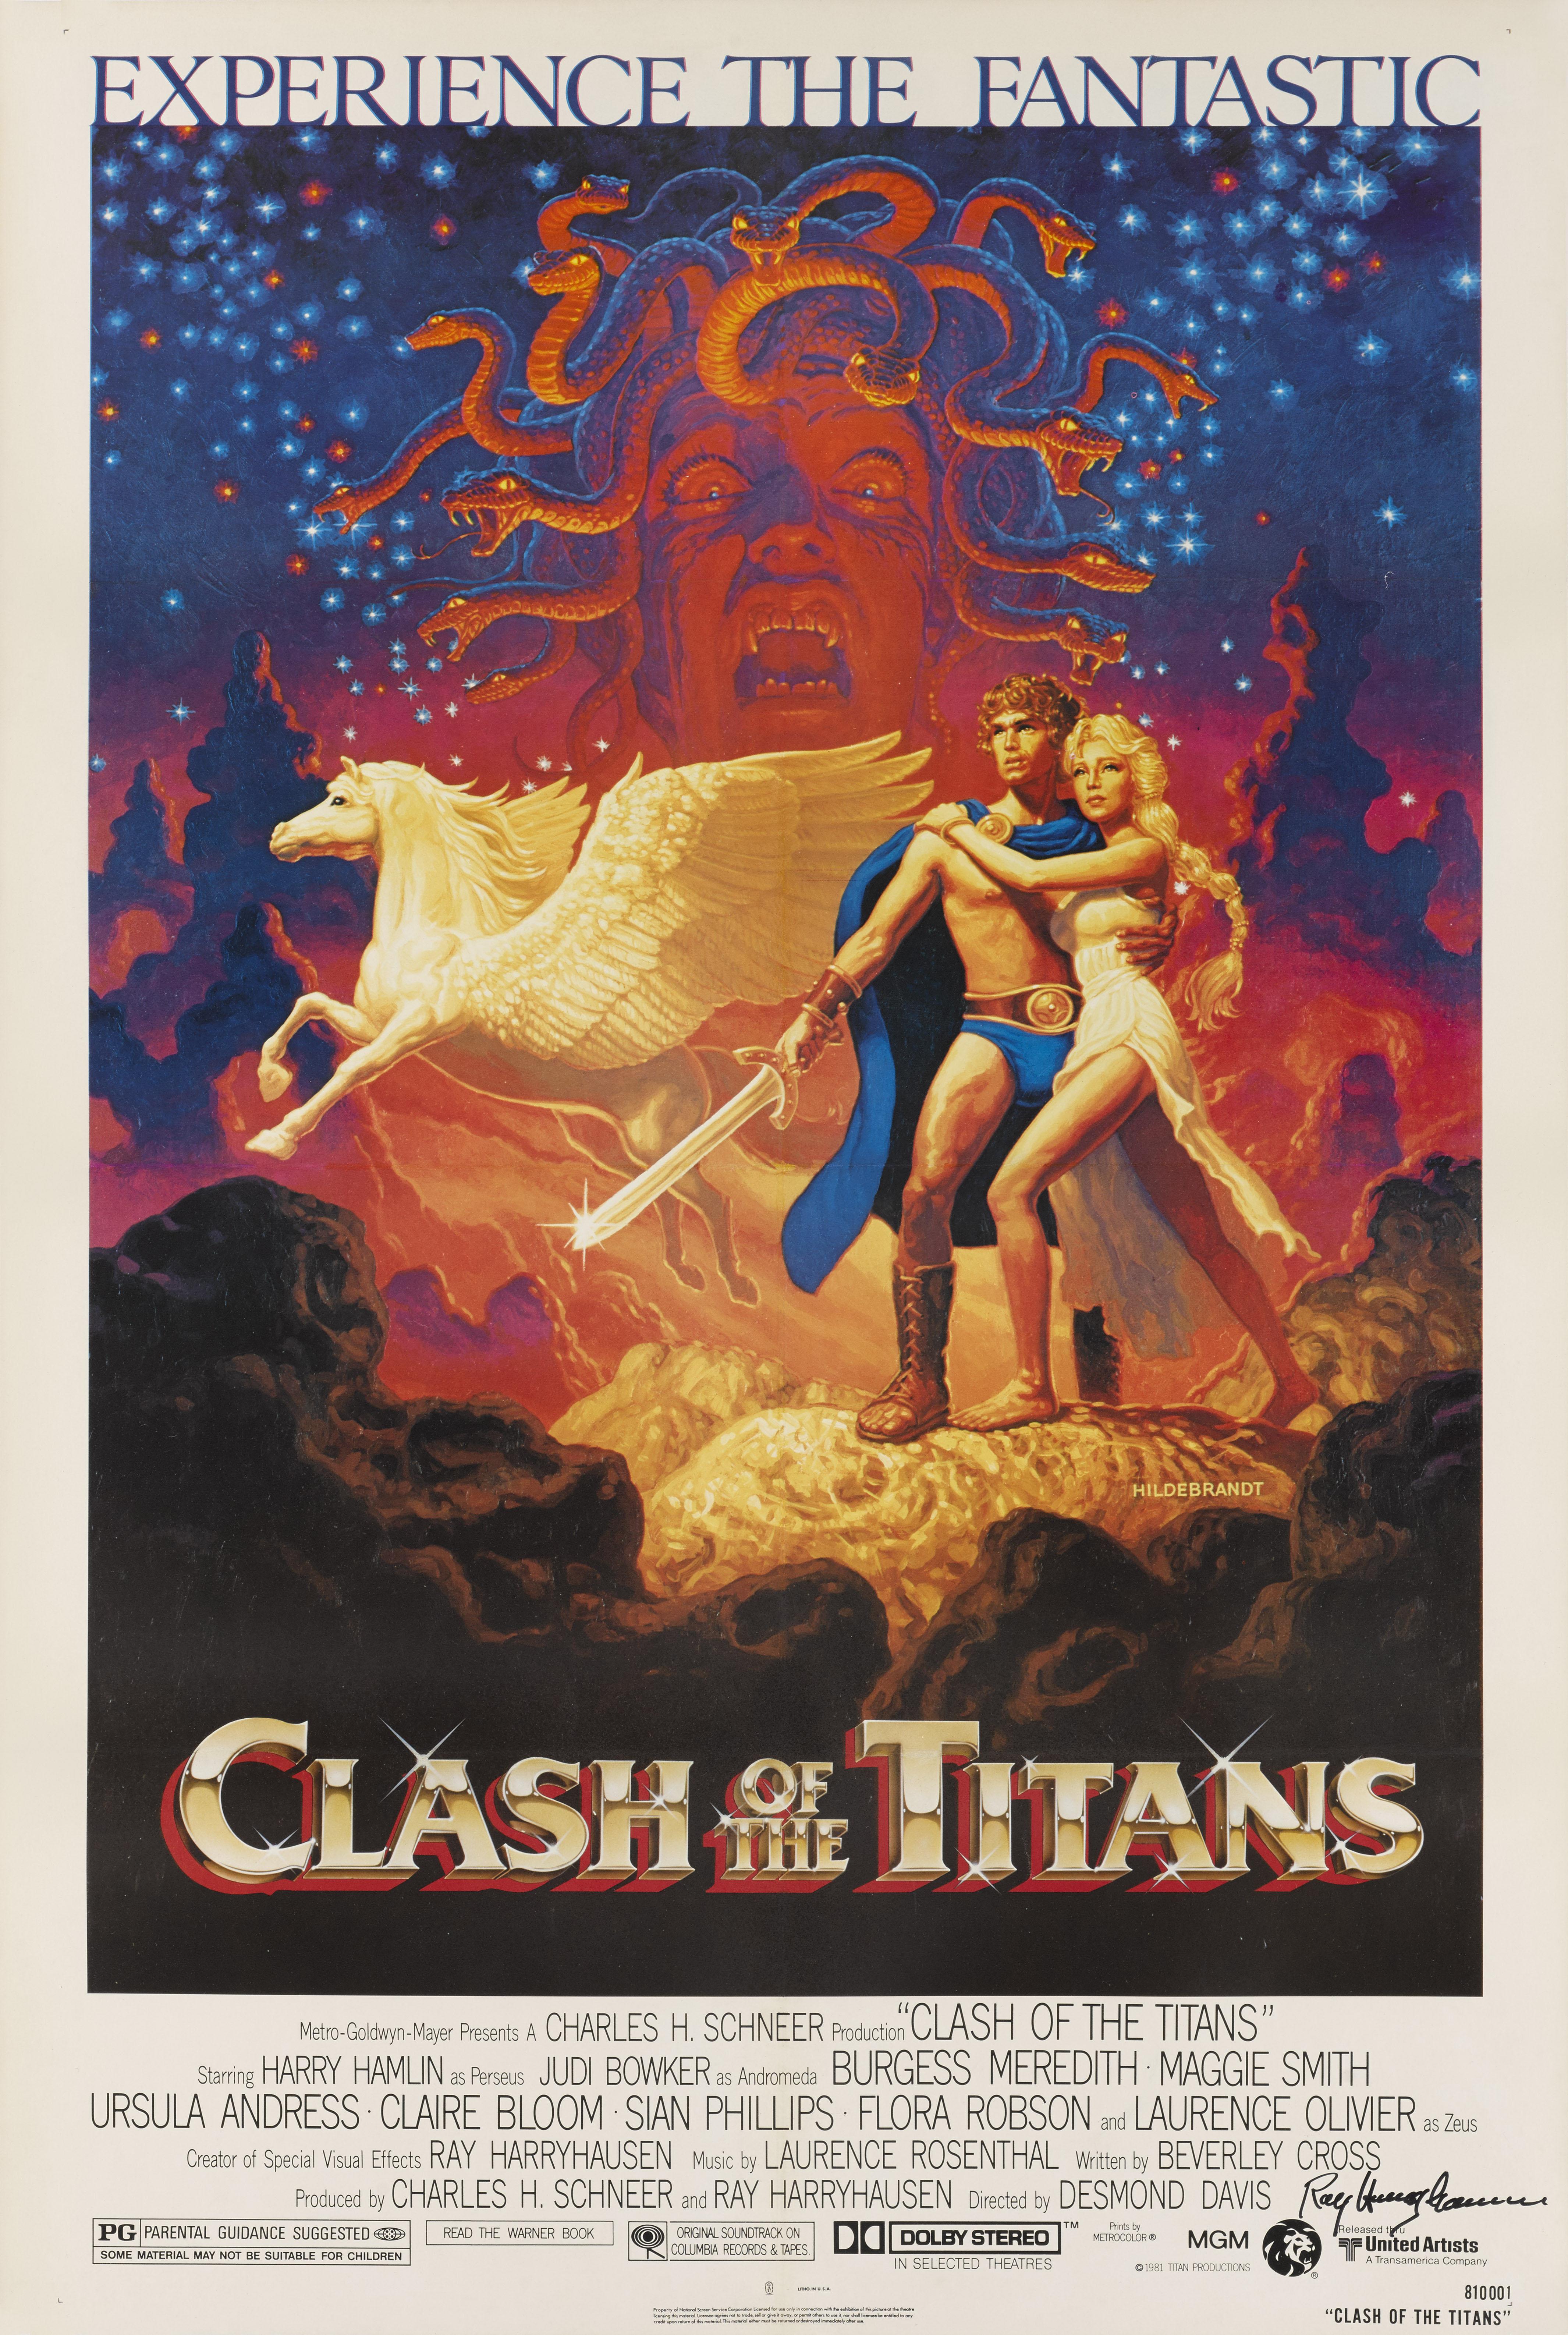 Original US film poster for Clash of the Titans, 1981.
This fantasy adventure film was directed by Desmond Davis and written by Beverley Cross. The film stars Harry Hamlin, Judi Bowker, Burgess Meredith, Maggie Smith and Laurence Olivier, and is